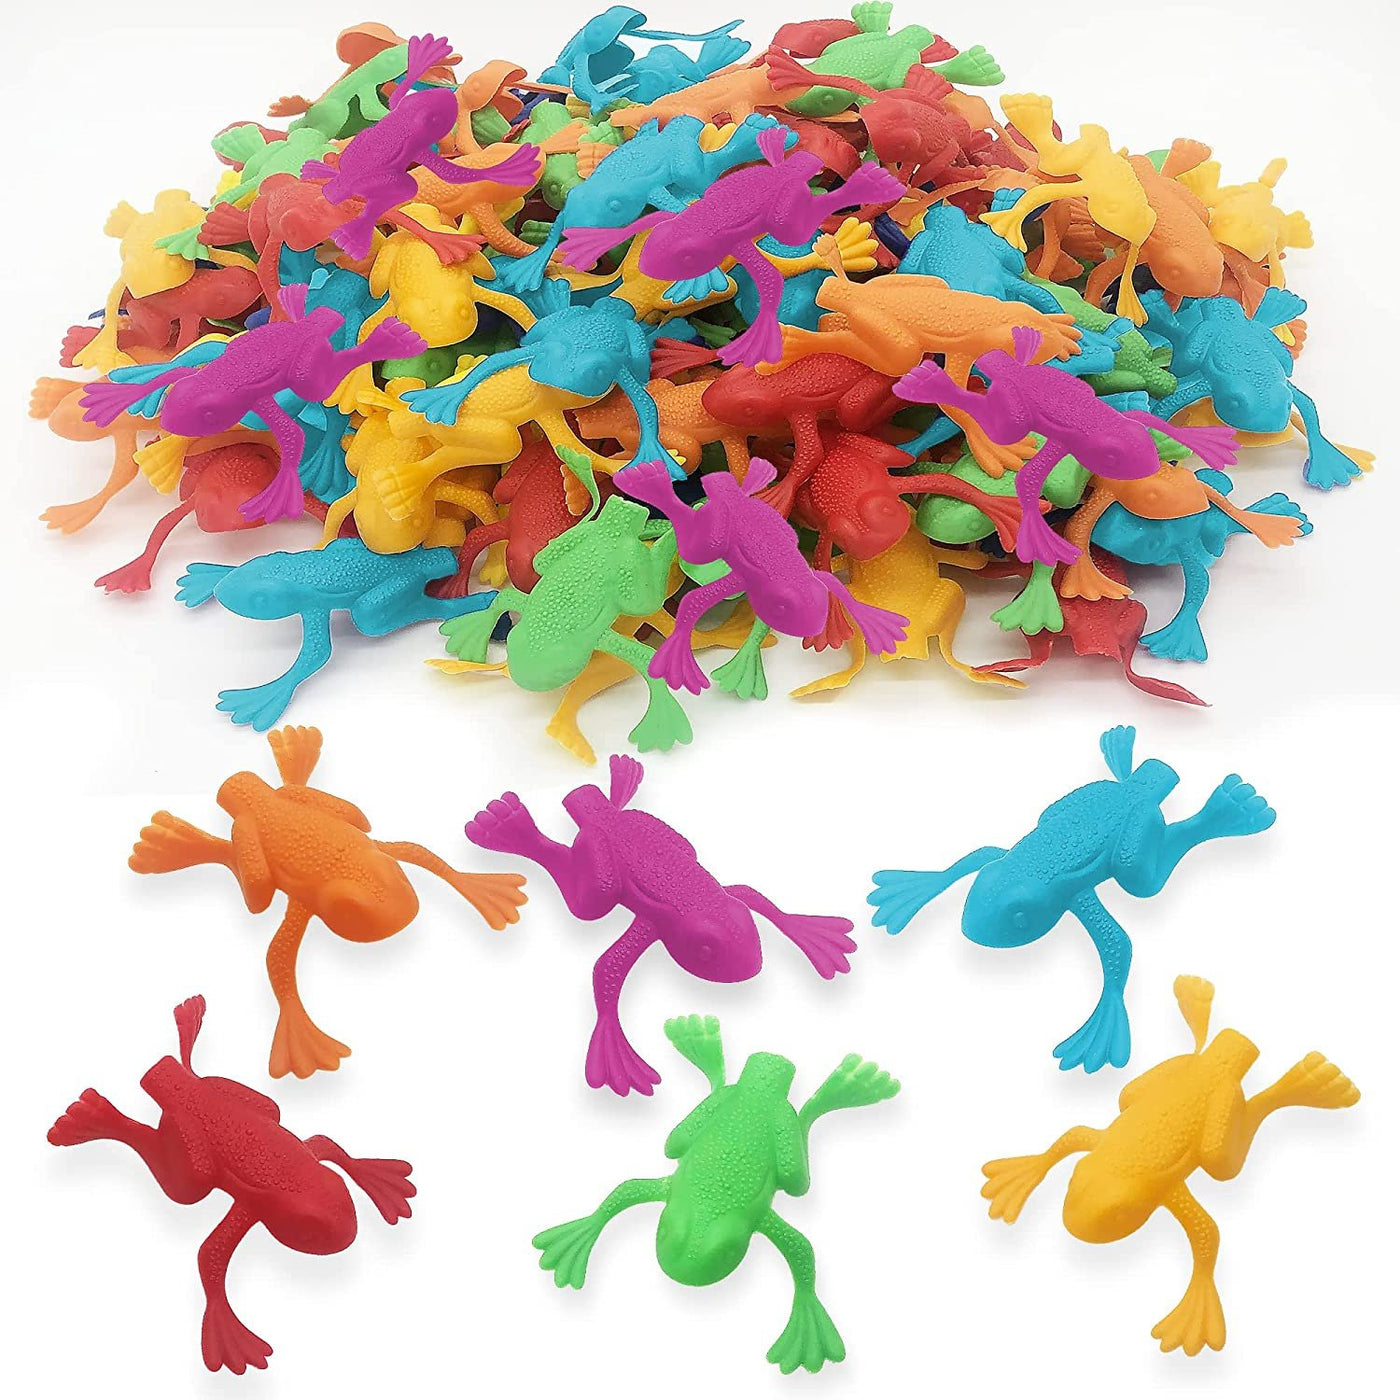 Jump n Leap Frog Toy - 130 Pack of 2" Assorted Colors, Cool Jumping Frogs for Kids - Vibrant Color Variety - Fun Party Favors, Goody Bag Fillers, Contest Prizes for Girls and Boys